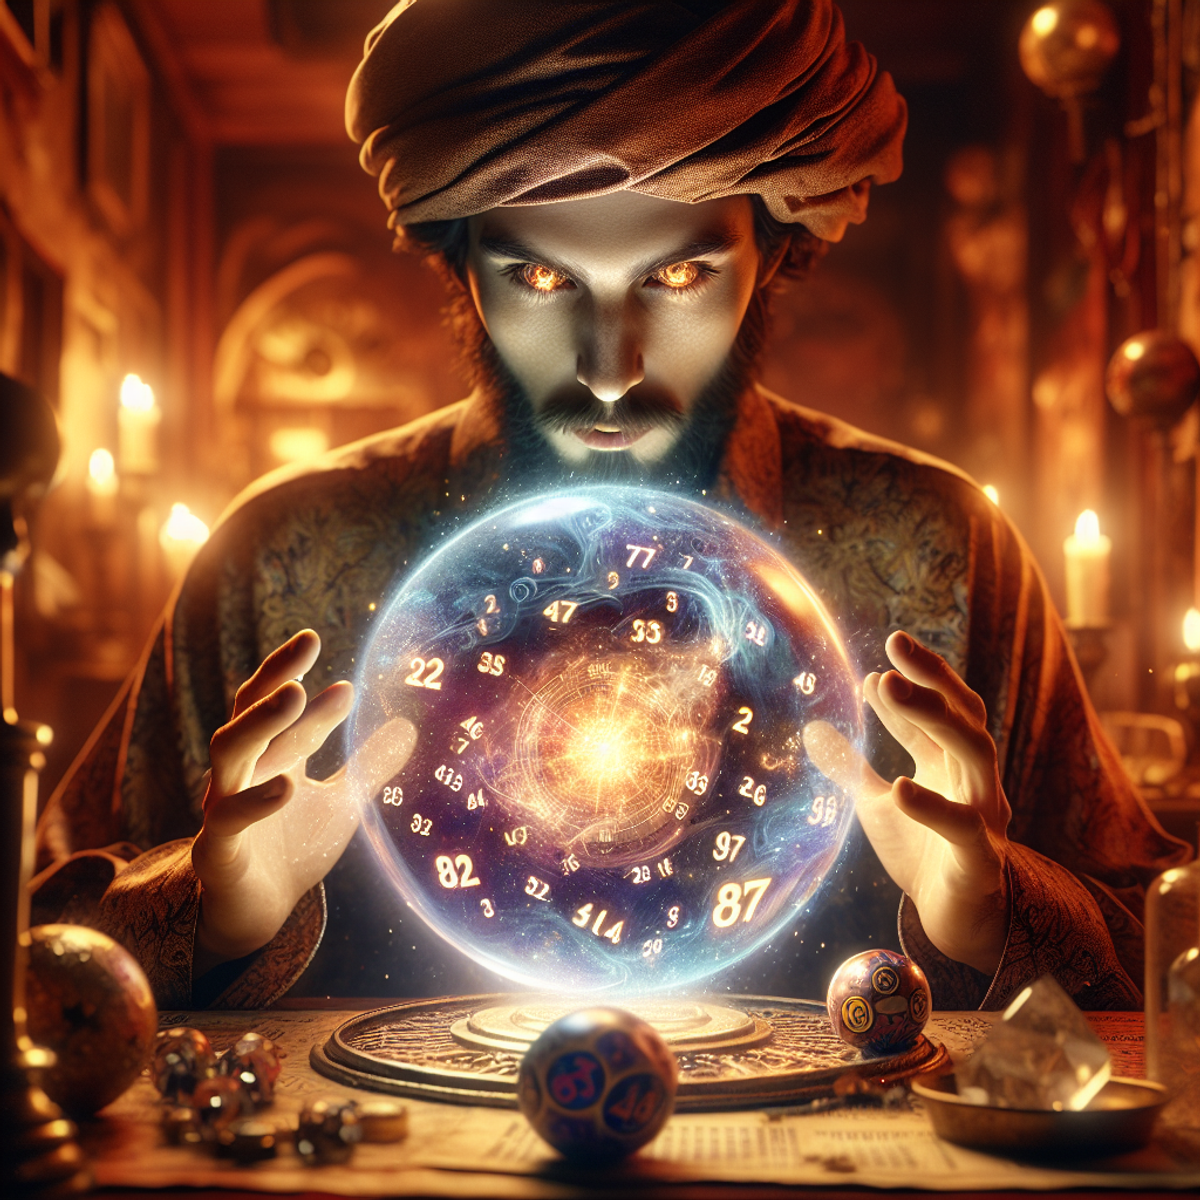 A non-binary fortune teller holds a glowing crystal ball with swirling lottery numbers and symbols.